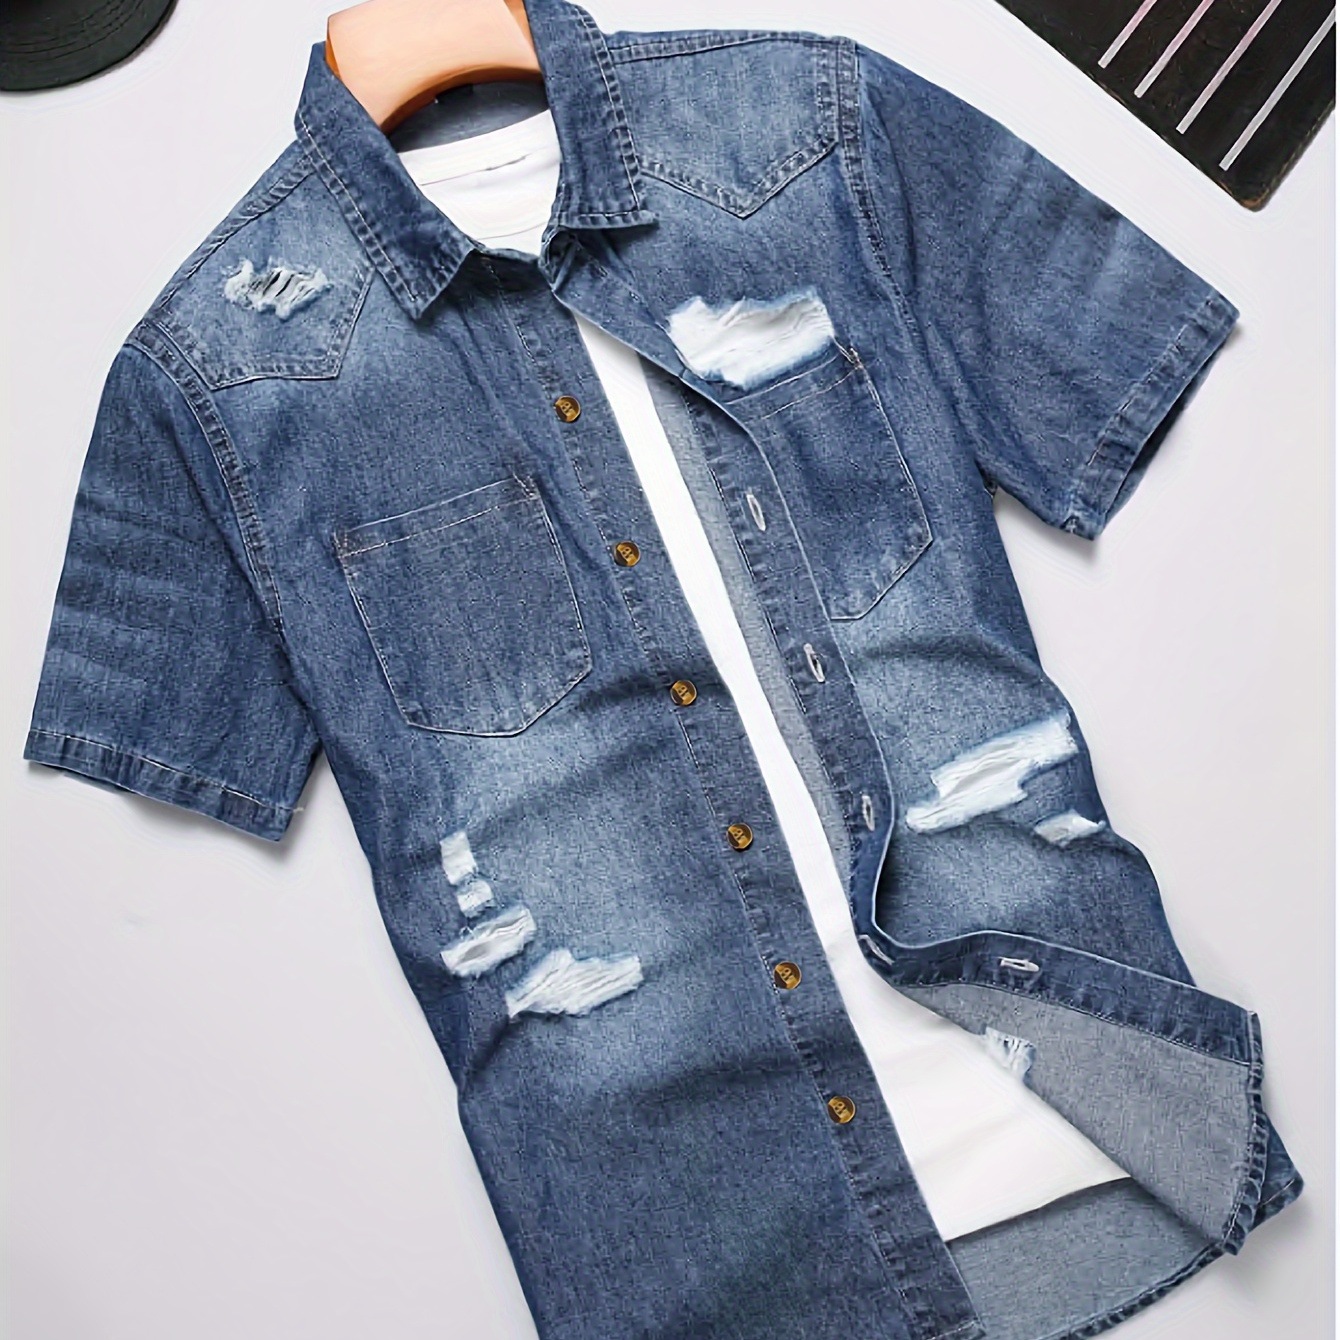 

Men's Solid Ripped Denim Shirt For Summer, Casual Stylish Short Sleeve Shirt For Male